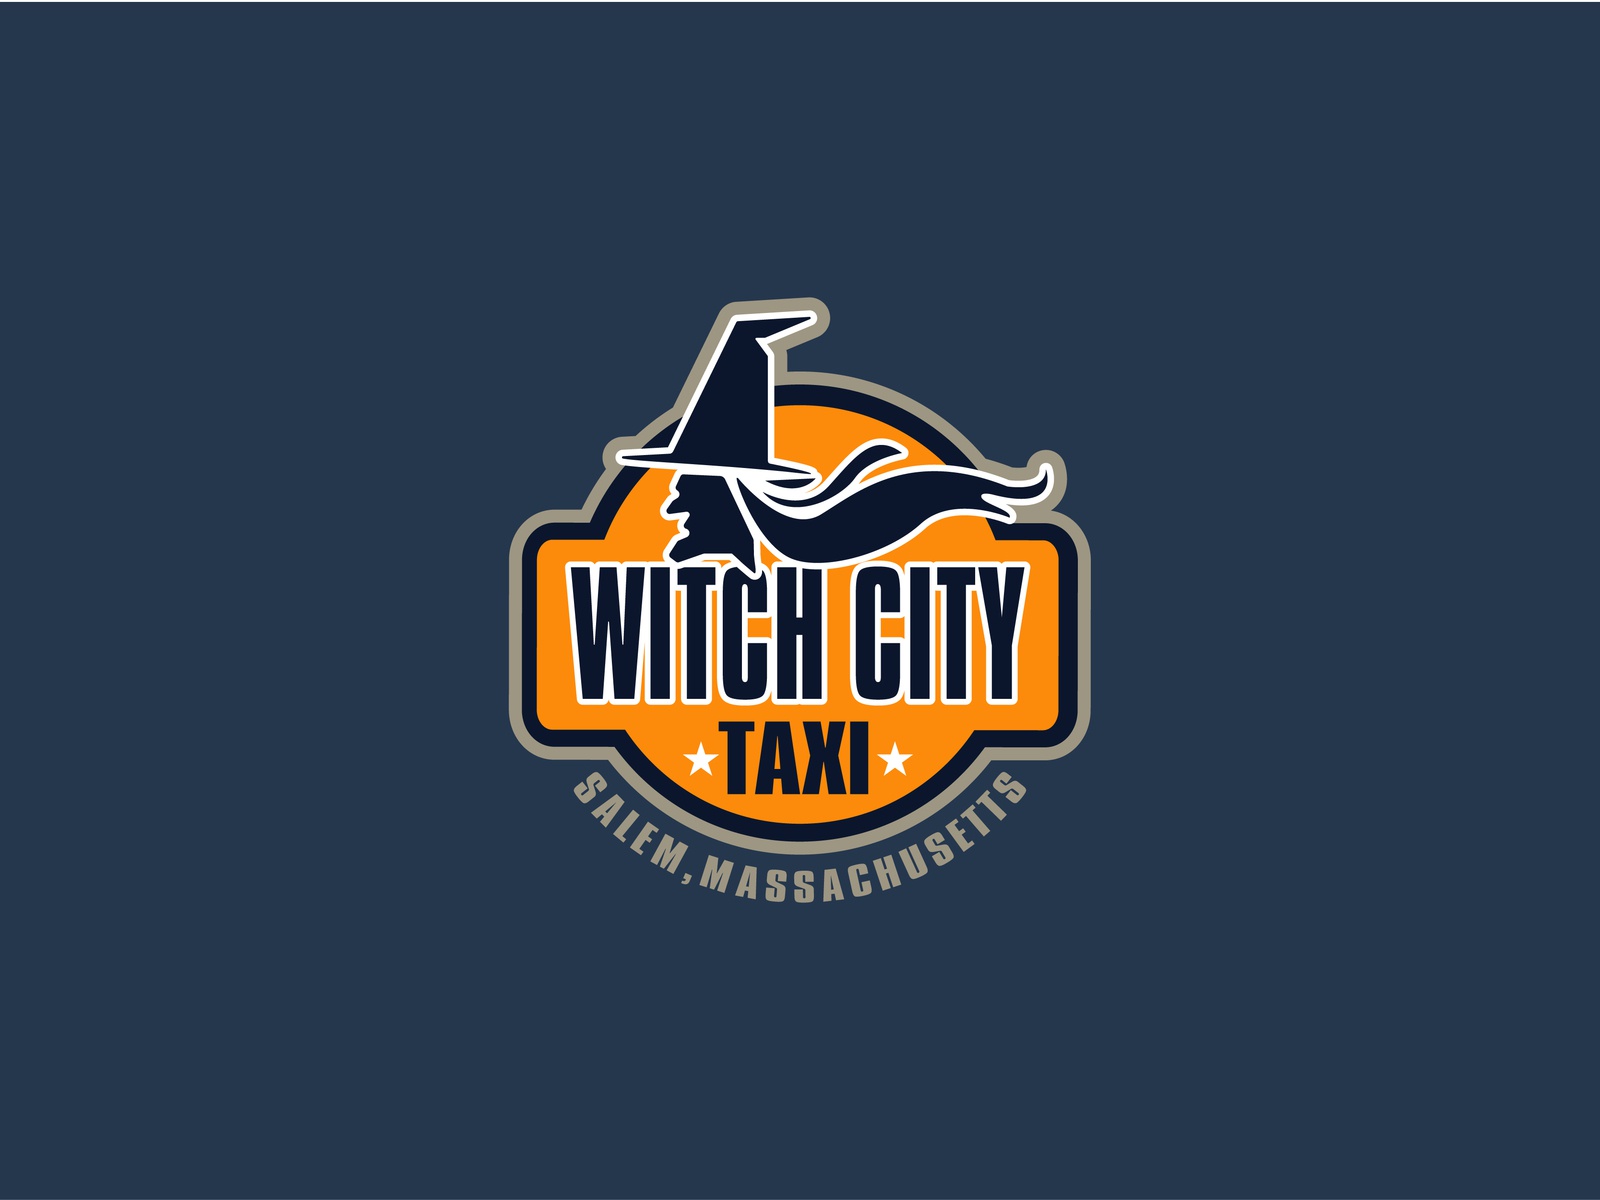 Business logo of WITCH CITY TAXI